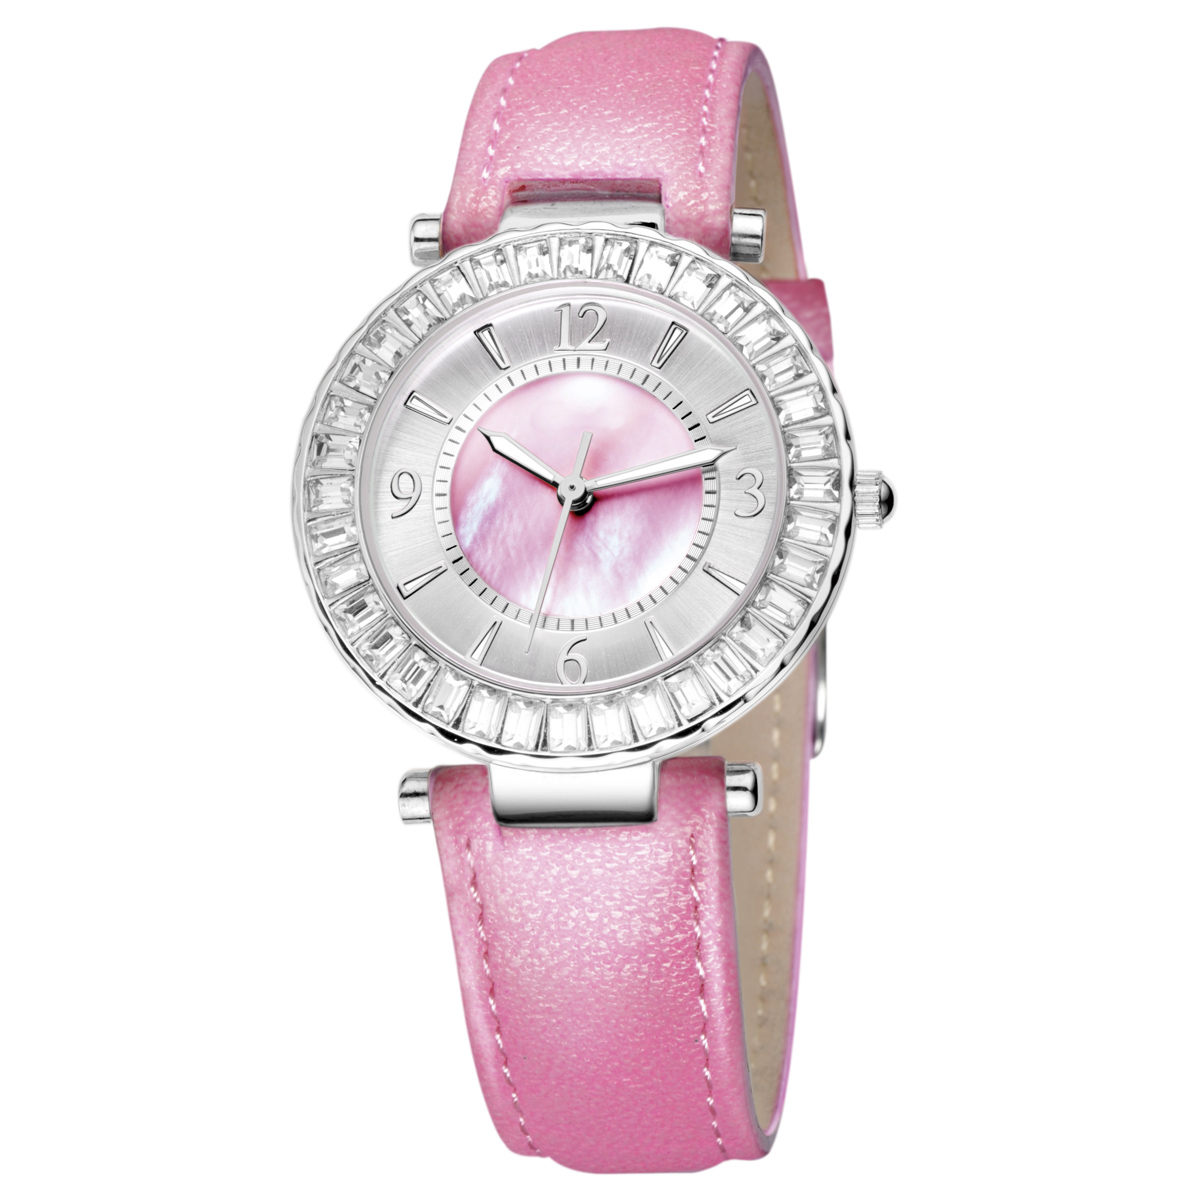 #2501-leather lady's watch with customized logo and colors - Pink